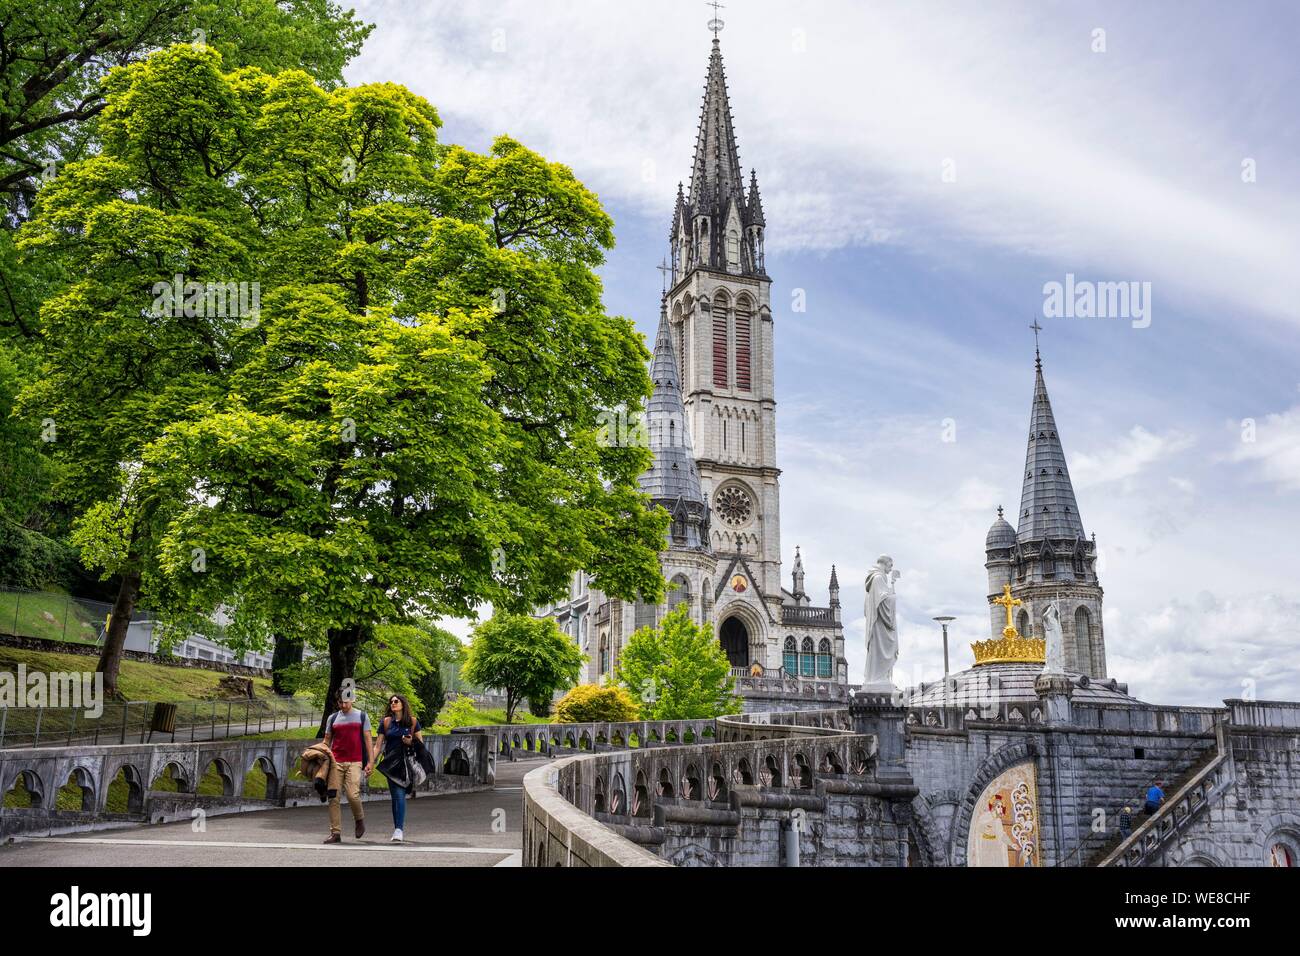 France, Hautes Pyrenees, Lourdes, Sanctuary of Our Lady of Lourdes, Basilica of the Immaculate Conception Stock Photo